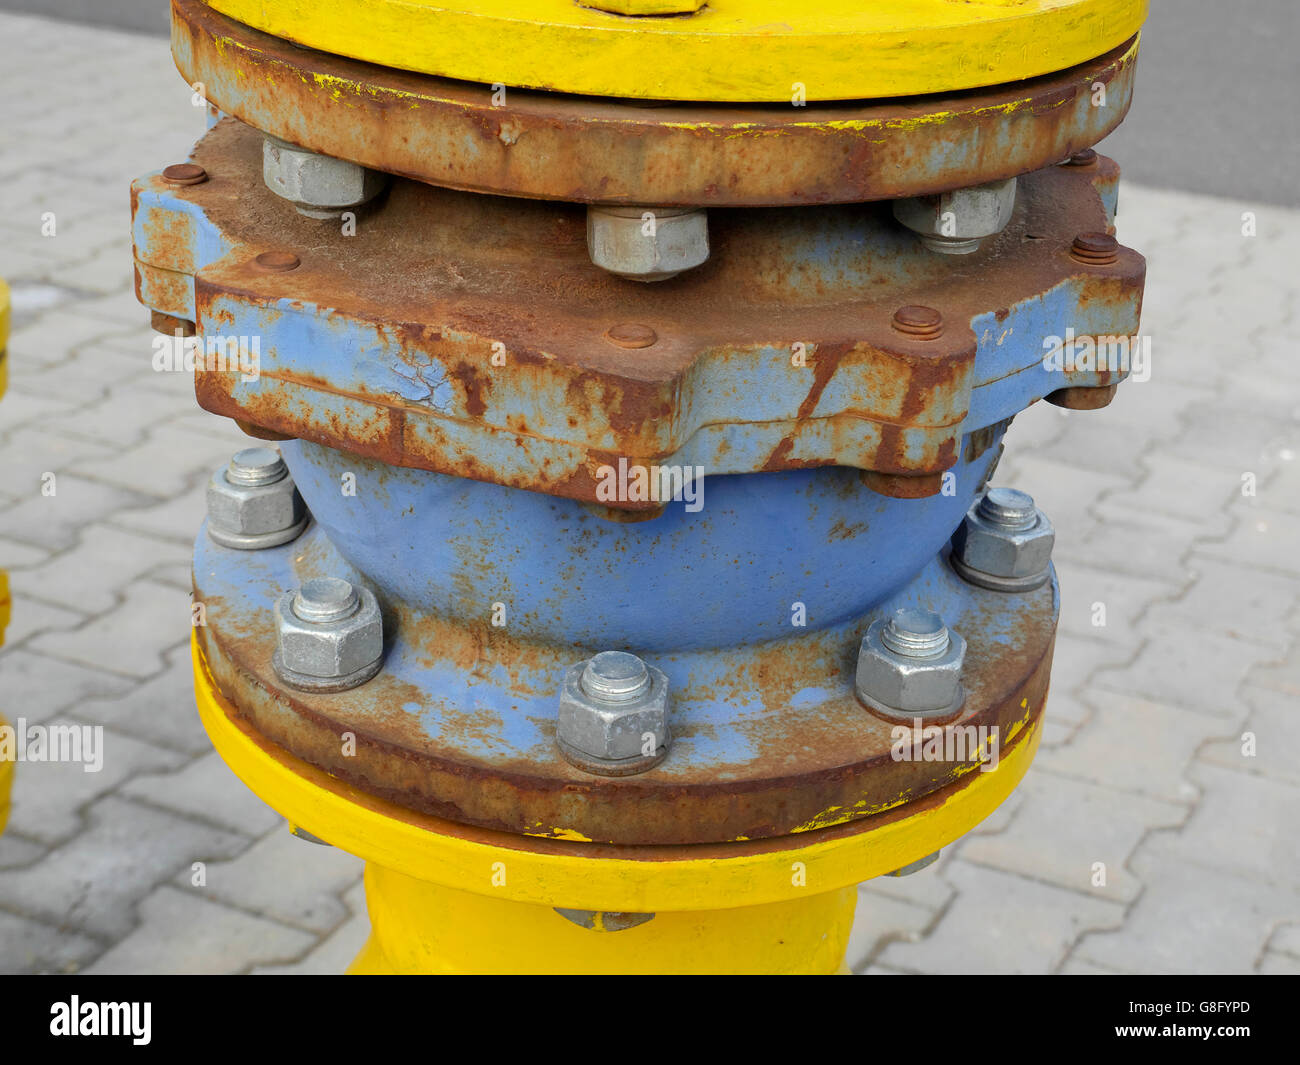 Large bolts and nut holding pipe together, Romania June 2016 Stock Photo